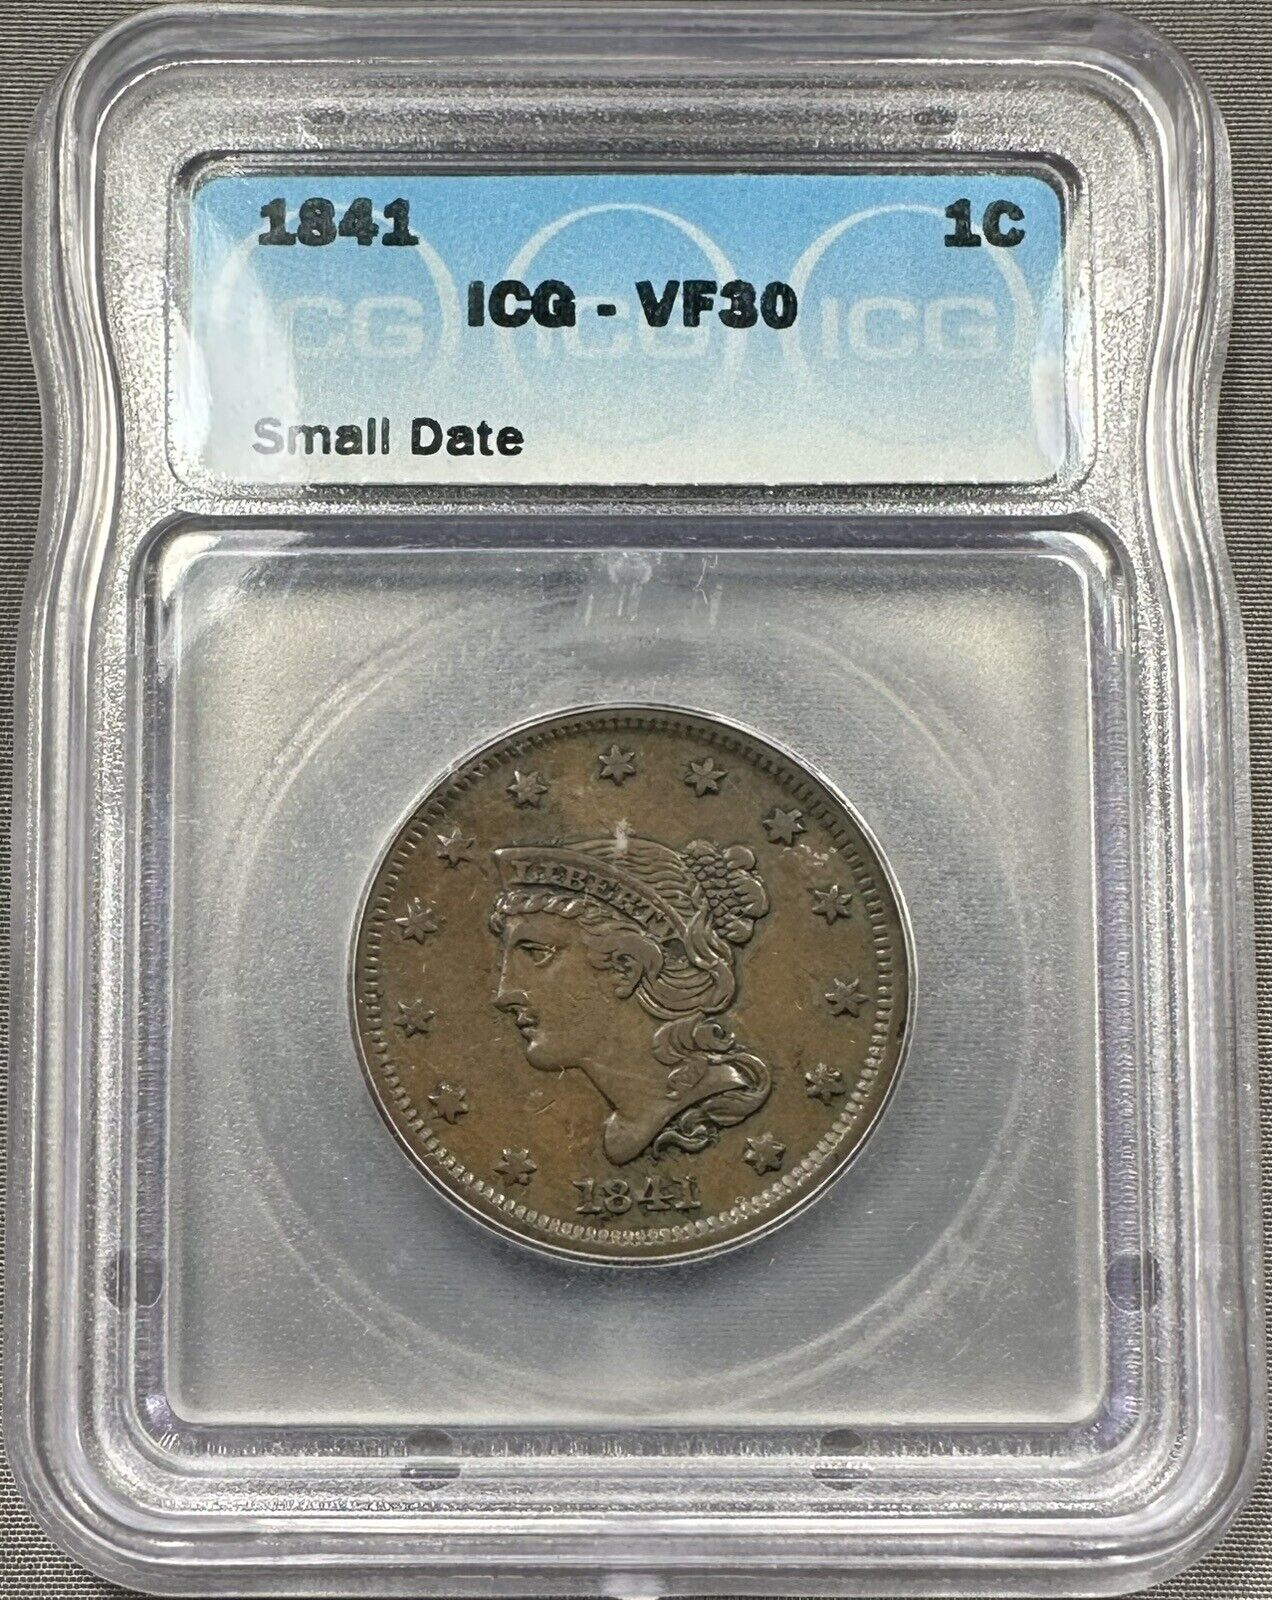 1841 Braided Hair Large Cent 1c - ICG VF30 - Choice Surfaces Small Date